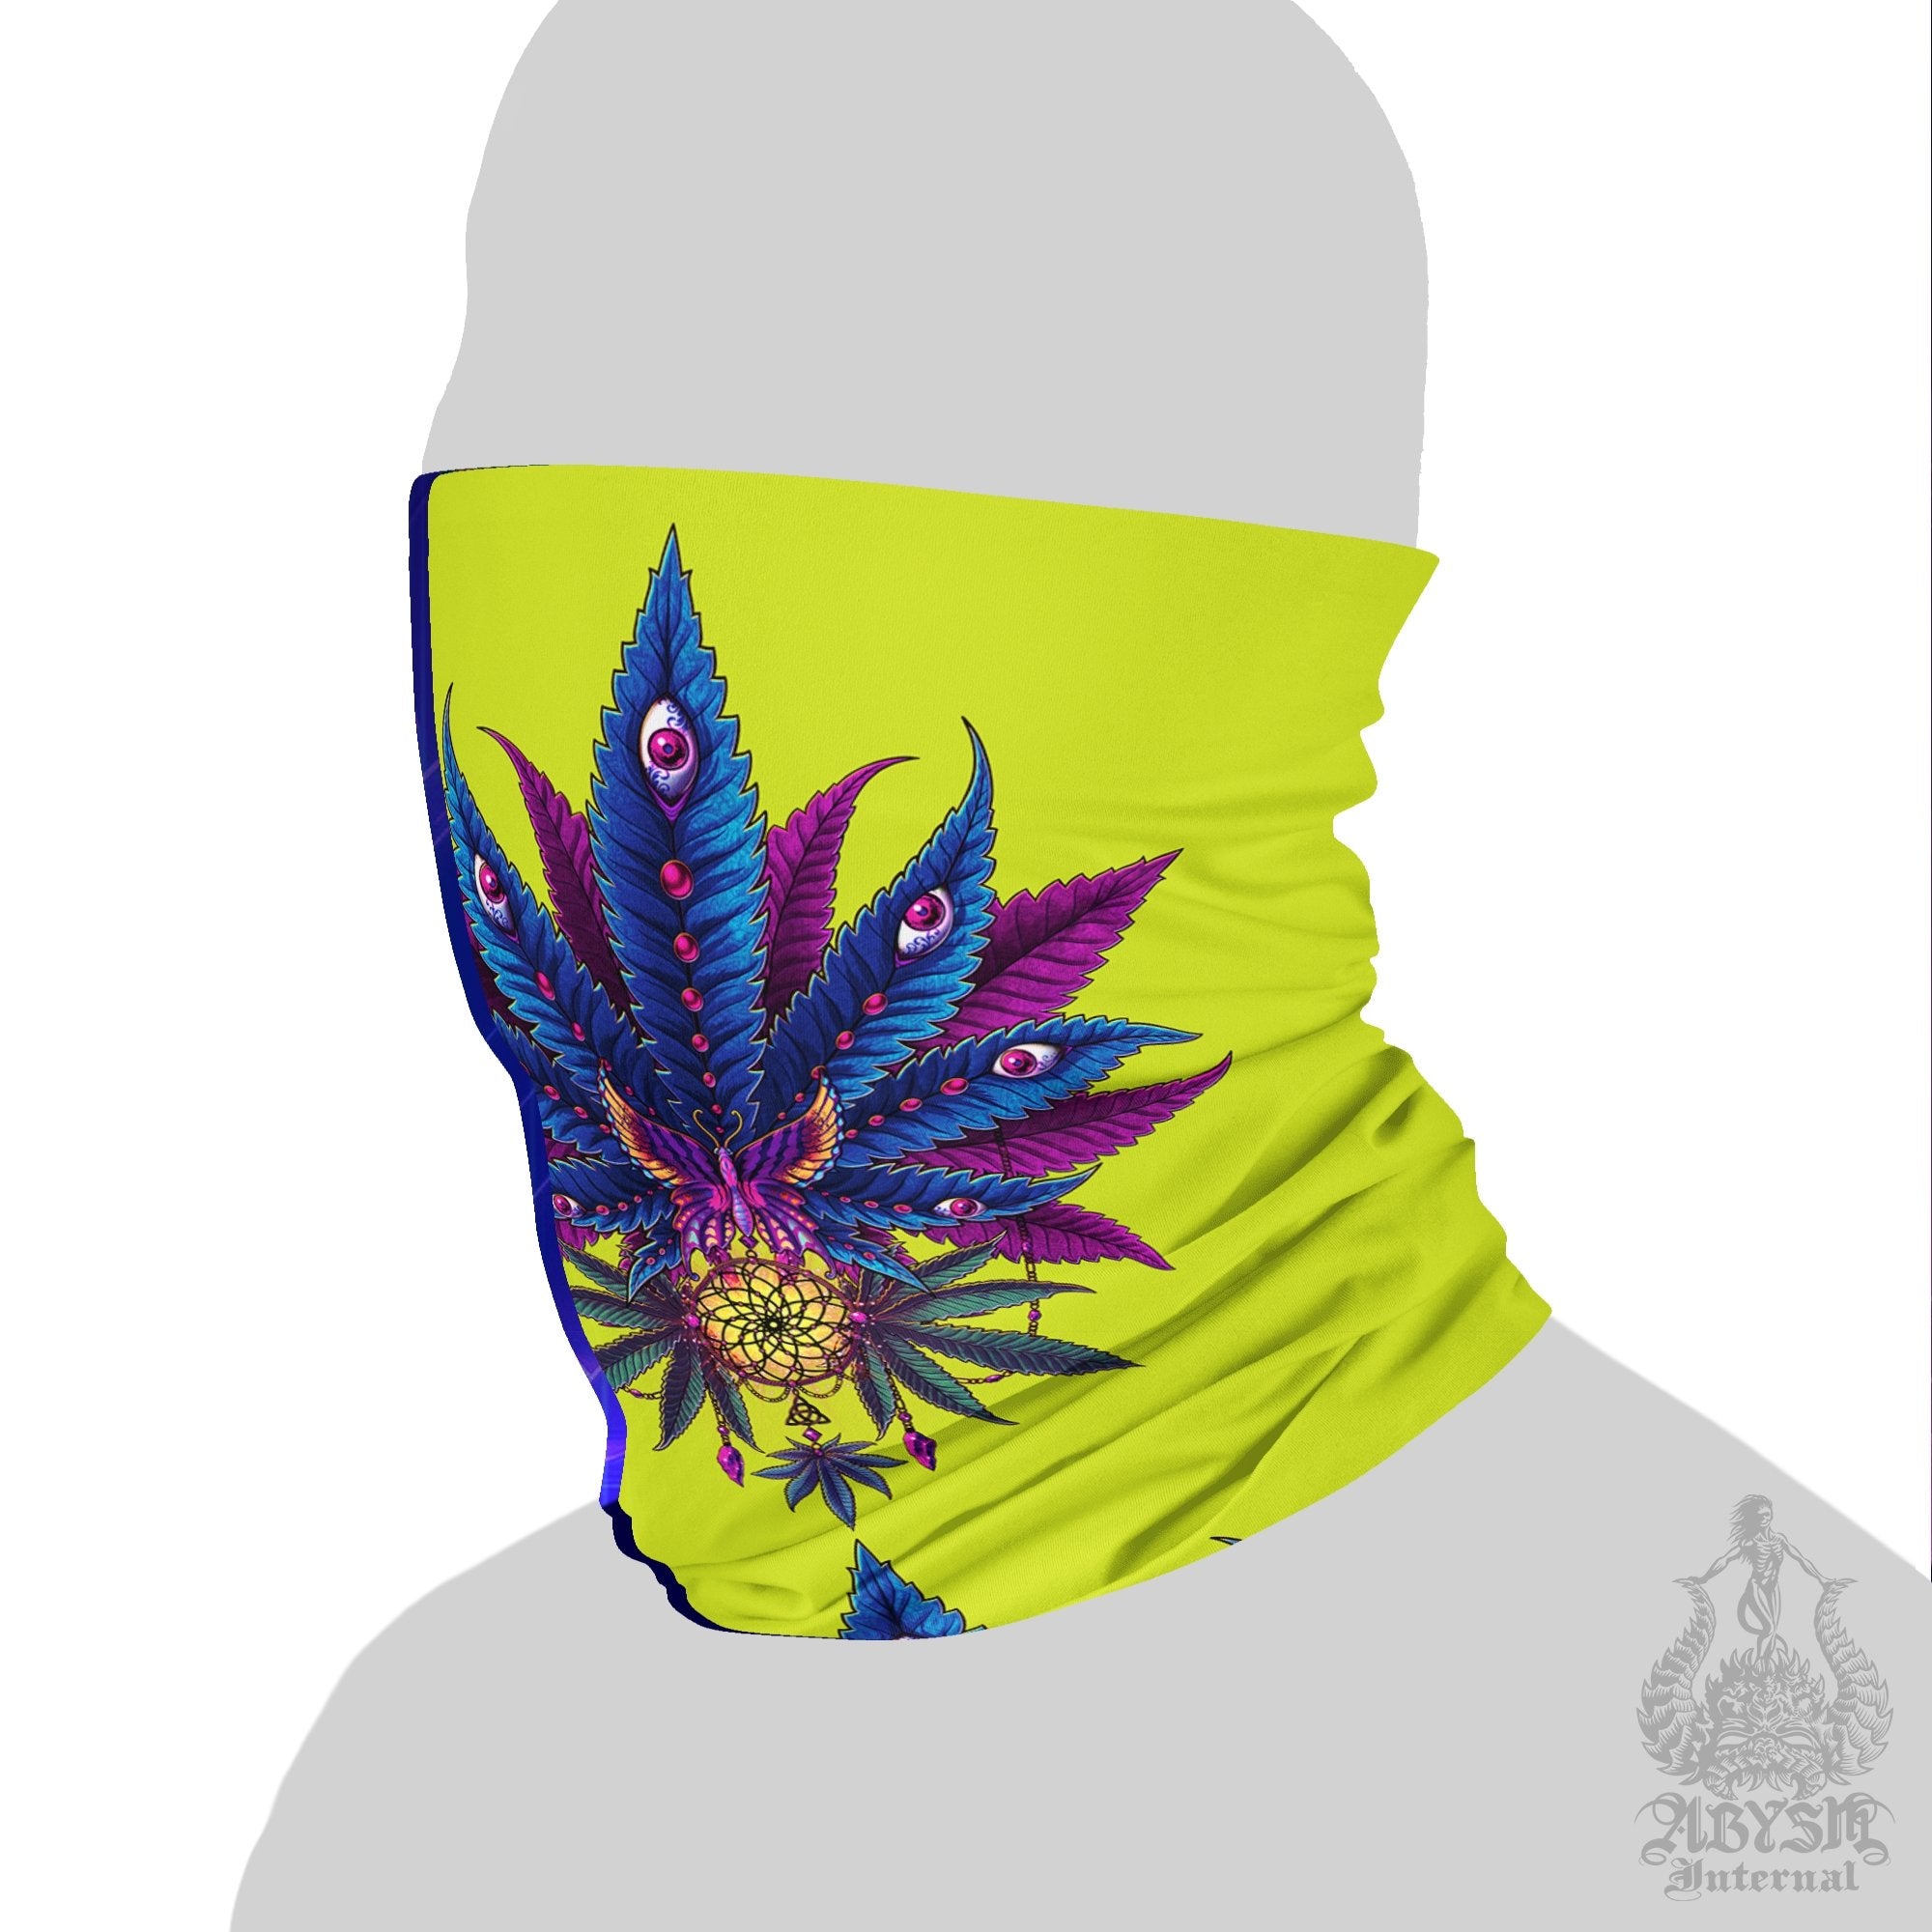 Weed Neck Gaiter, Cannabis Face Mask, Marijuana Head Covering, Neon Retrowave, Festival Outfit, 420 Gift - II Green - Abysm Internal